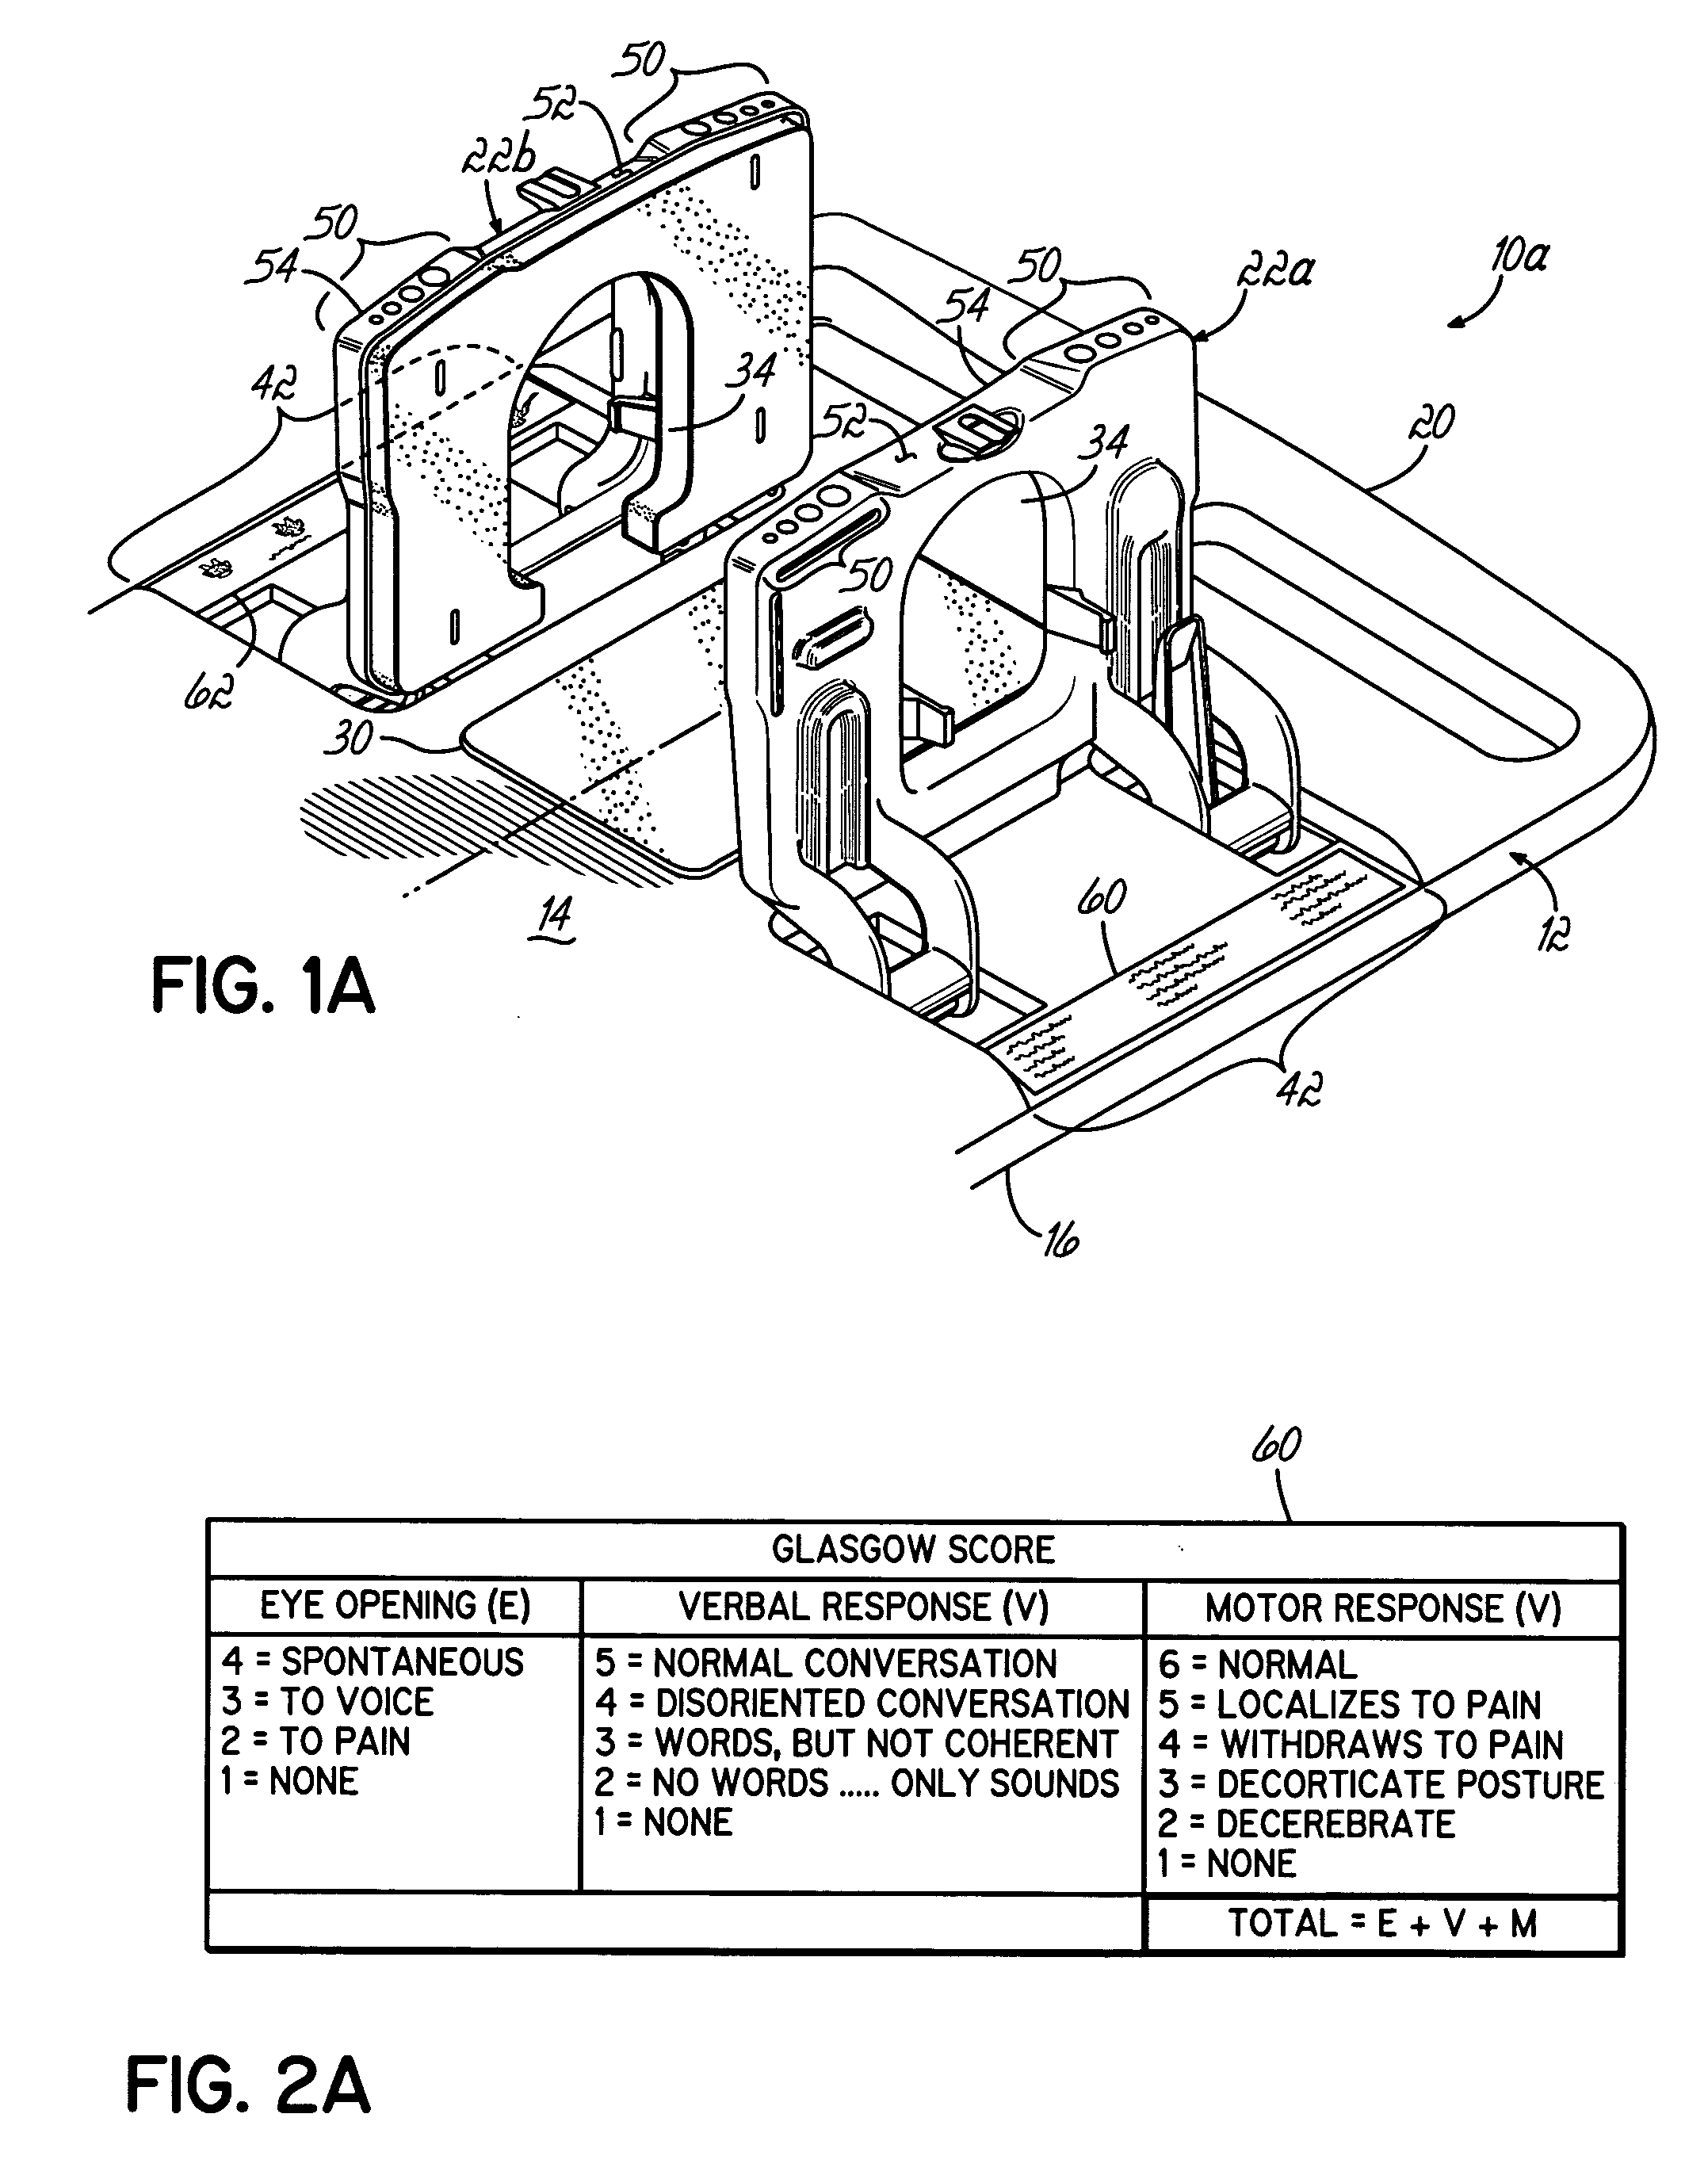 Patient immobilization device with diagnostic capabilities